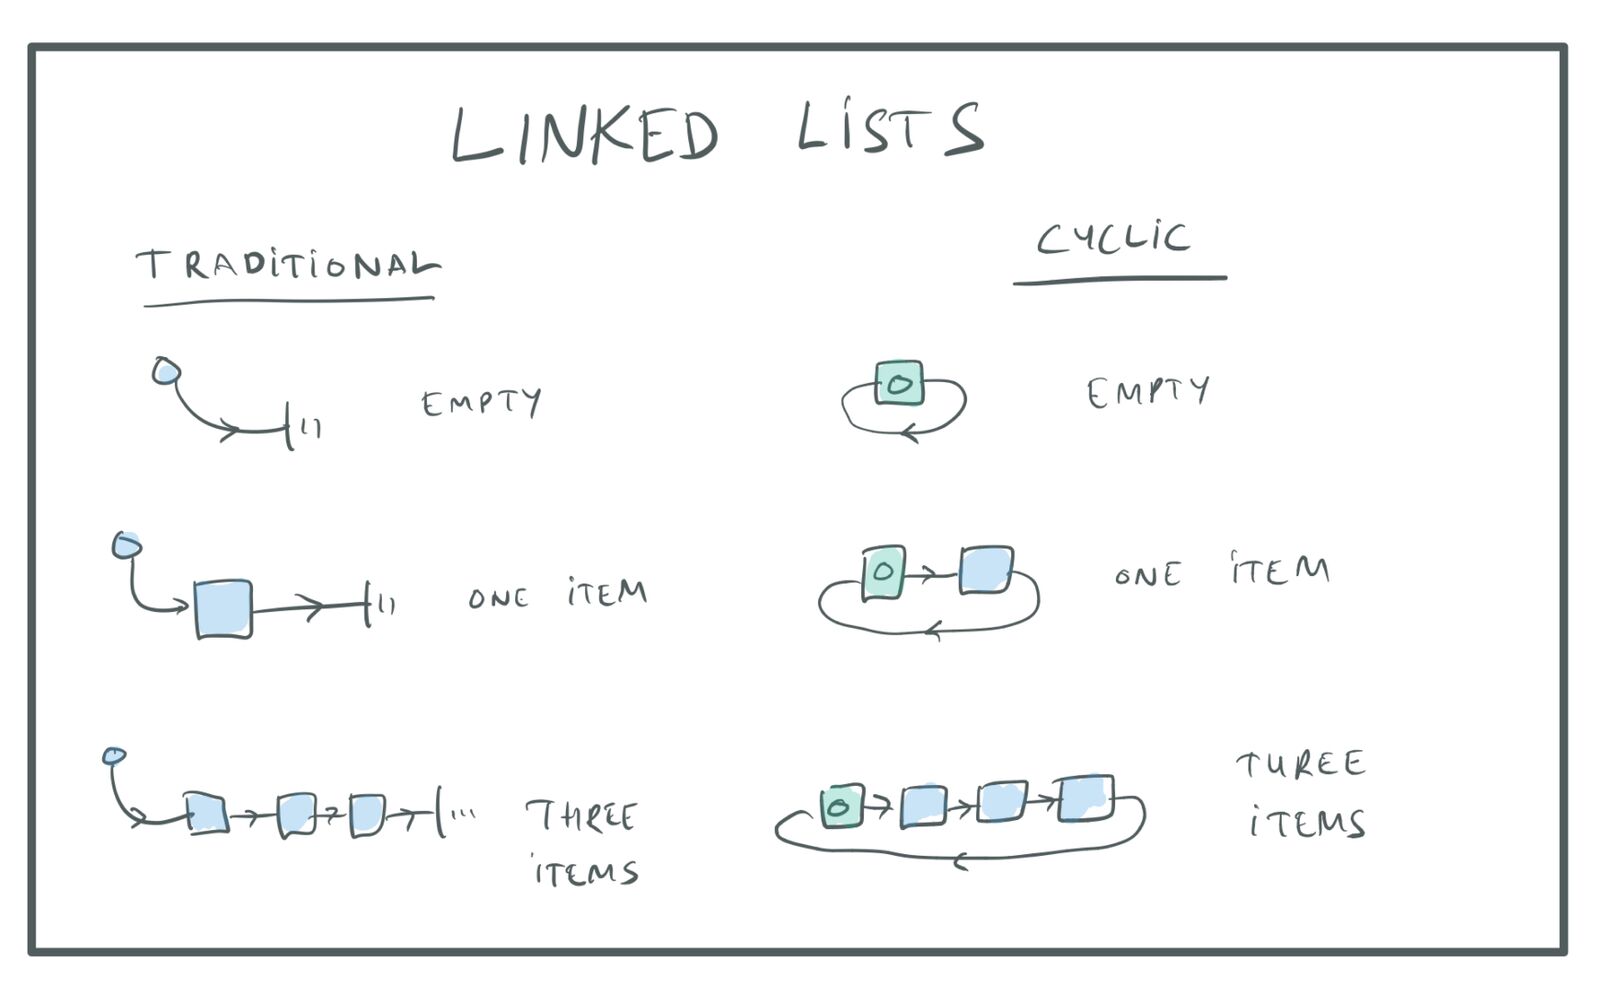 Traditional and cyclic linked lists.